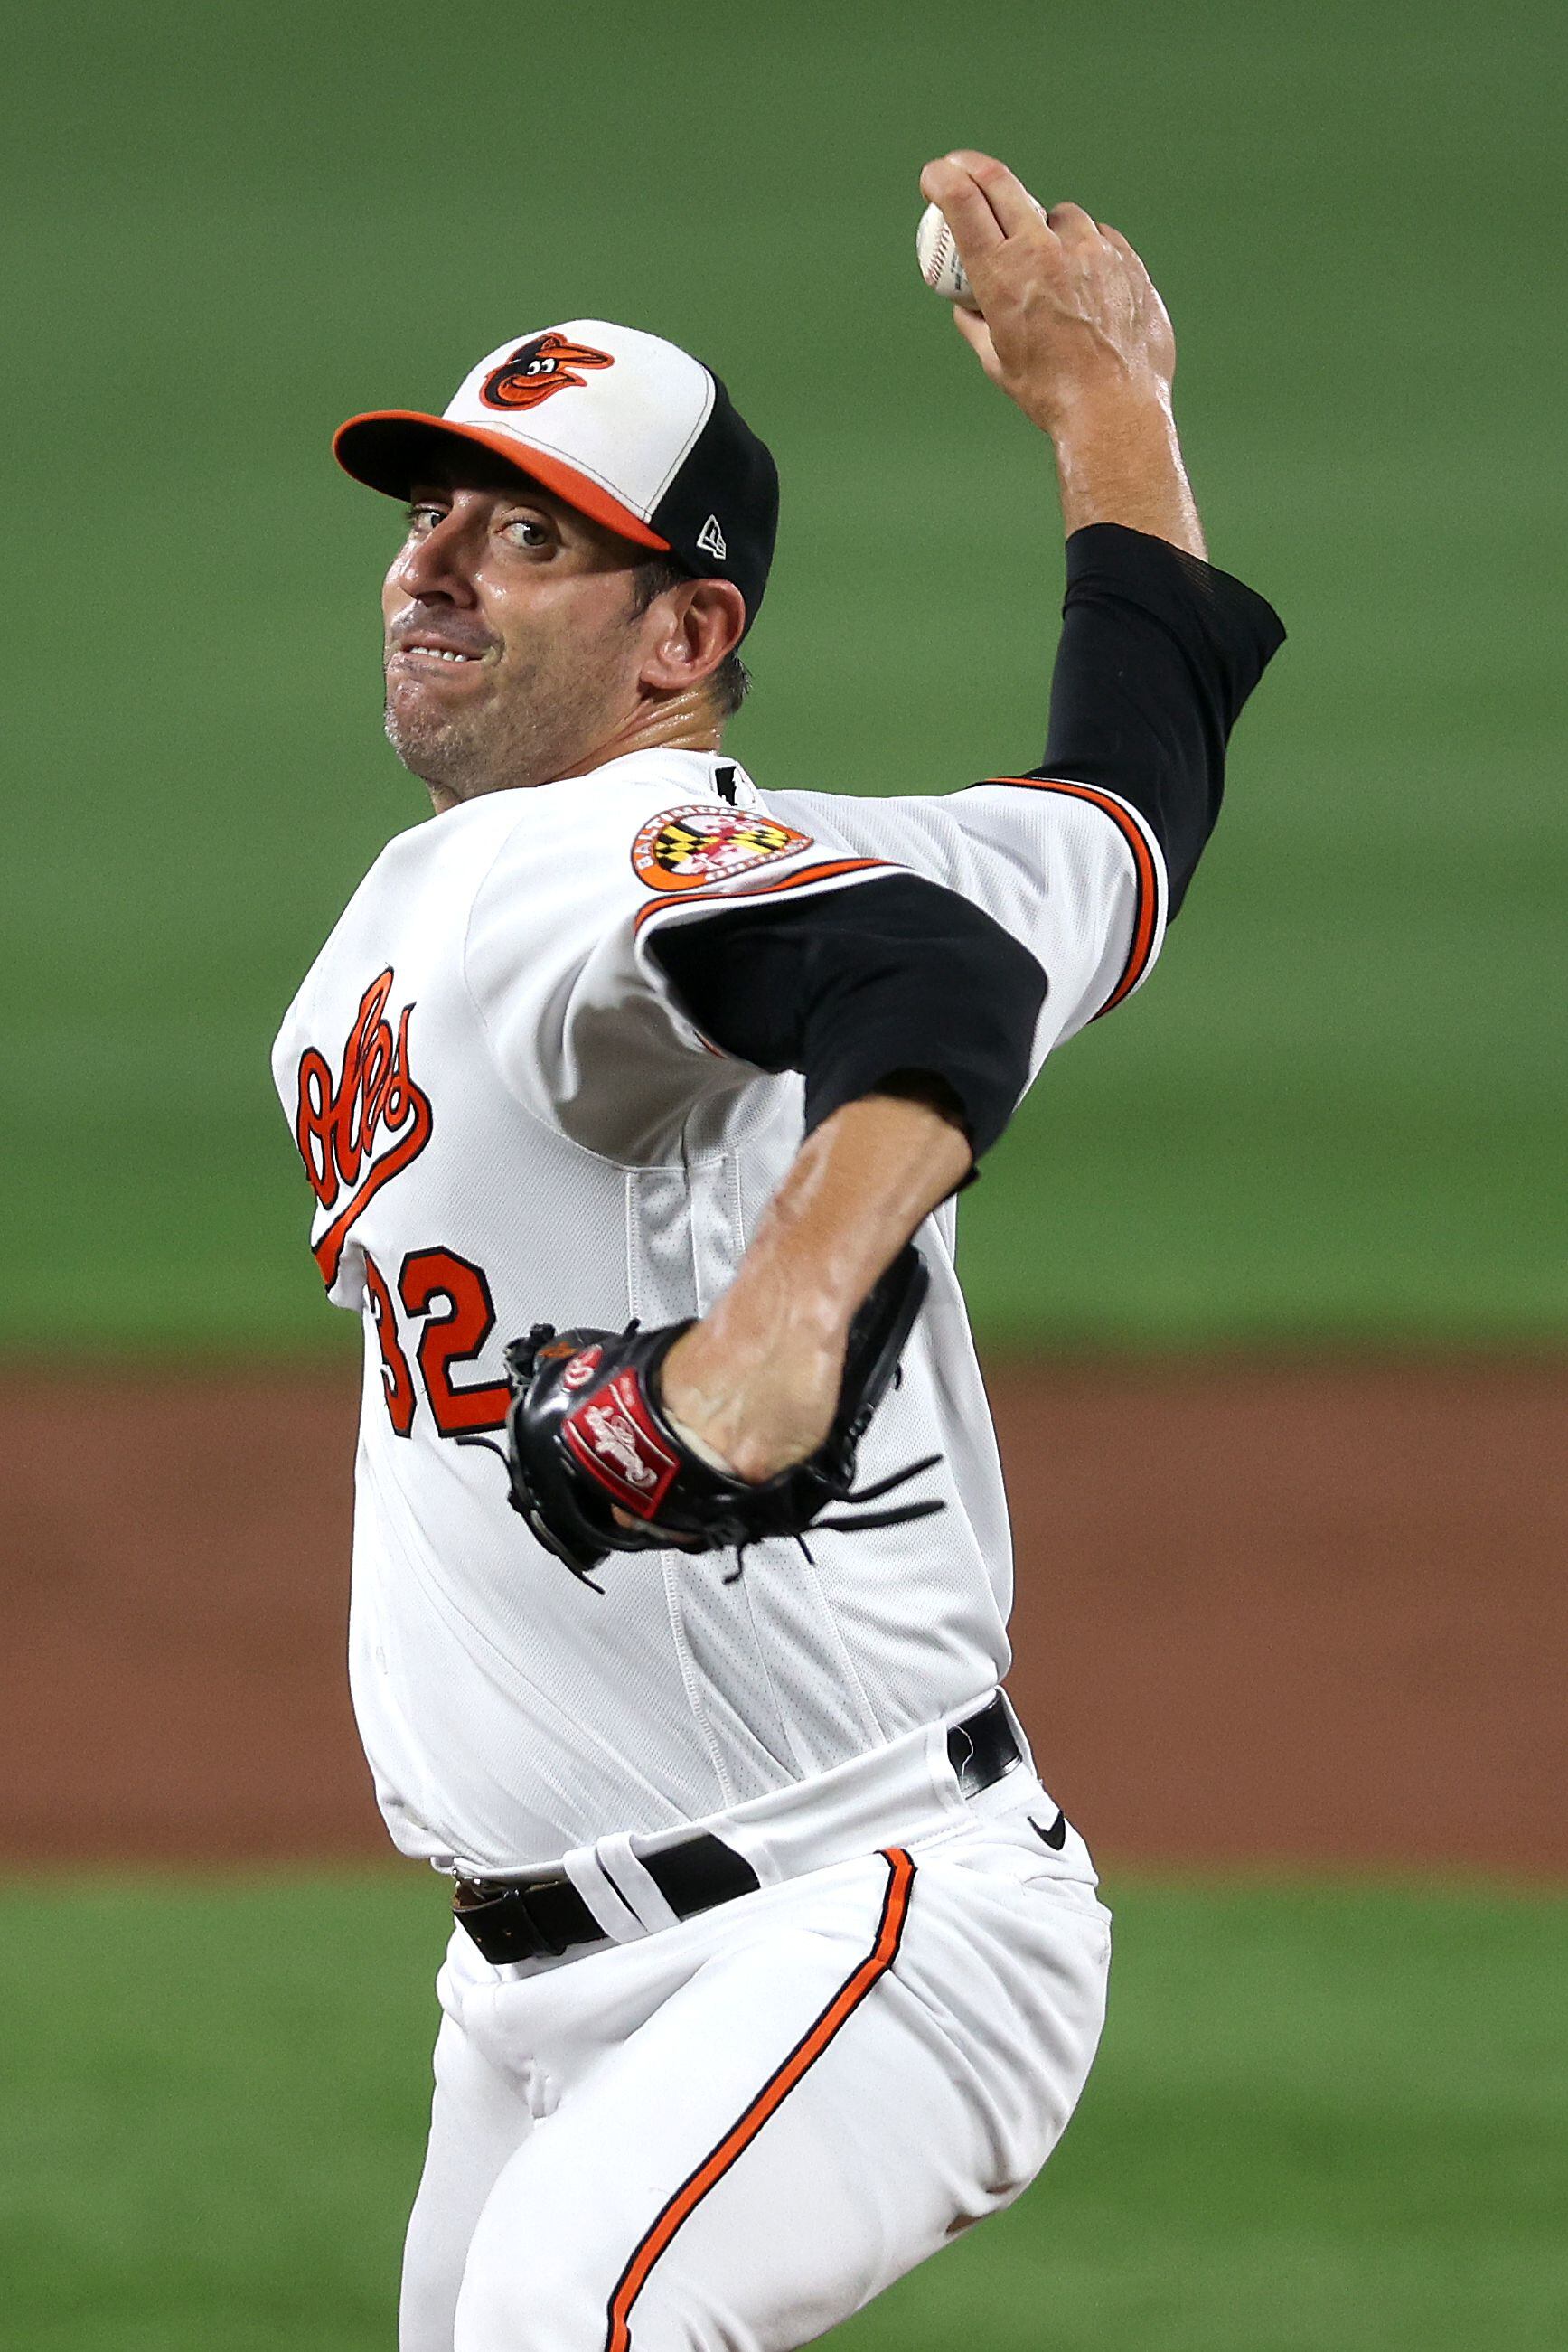 An ode to the Orioles' dark years - The Baltimore Banner